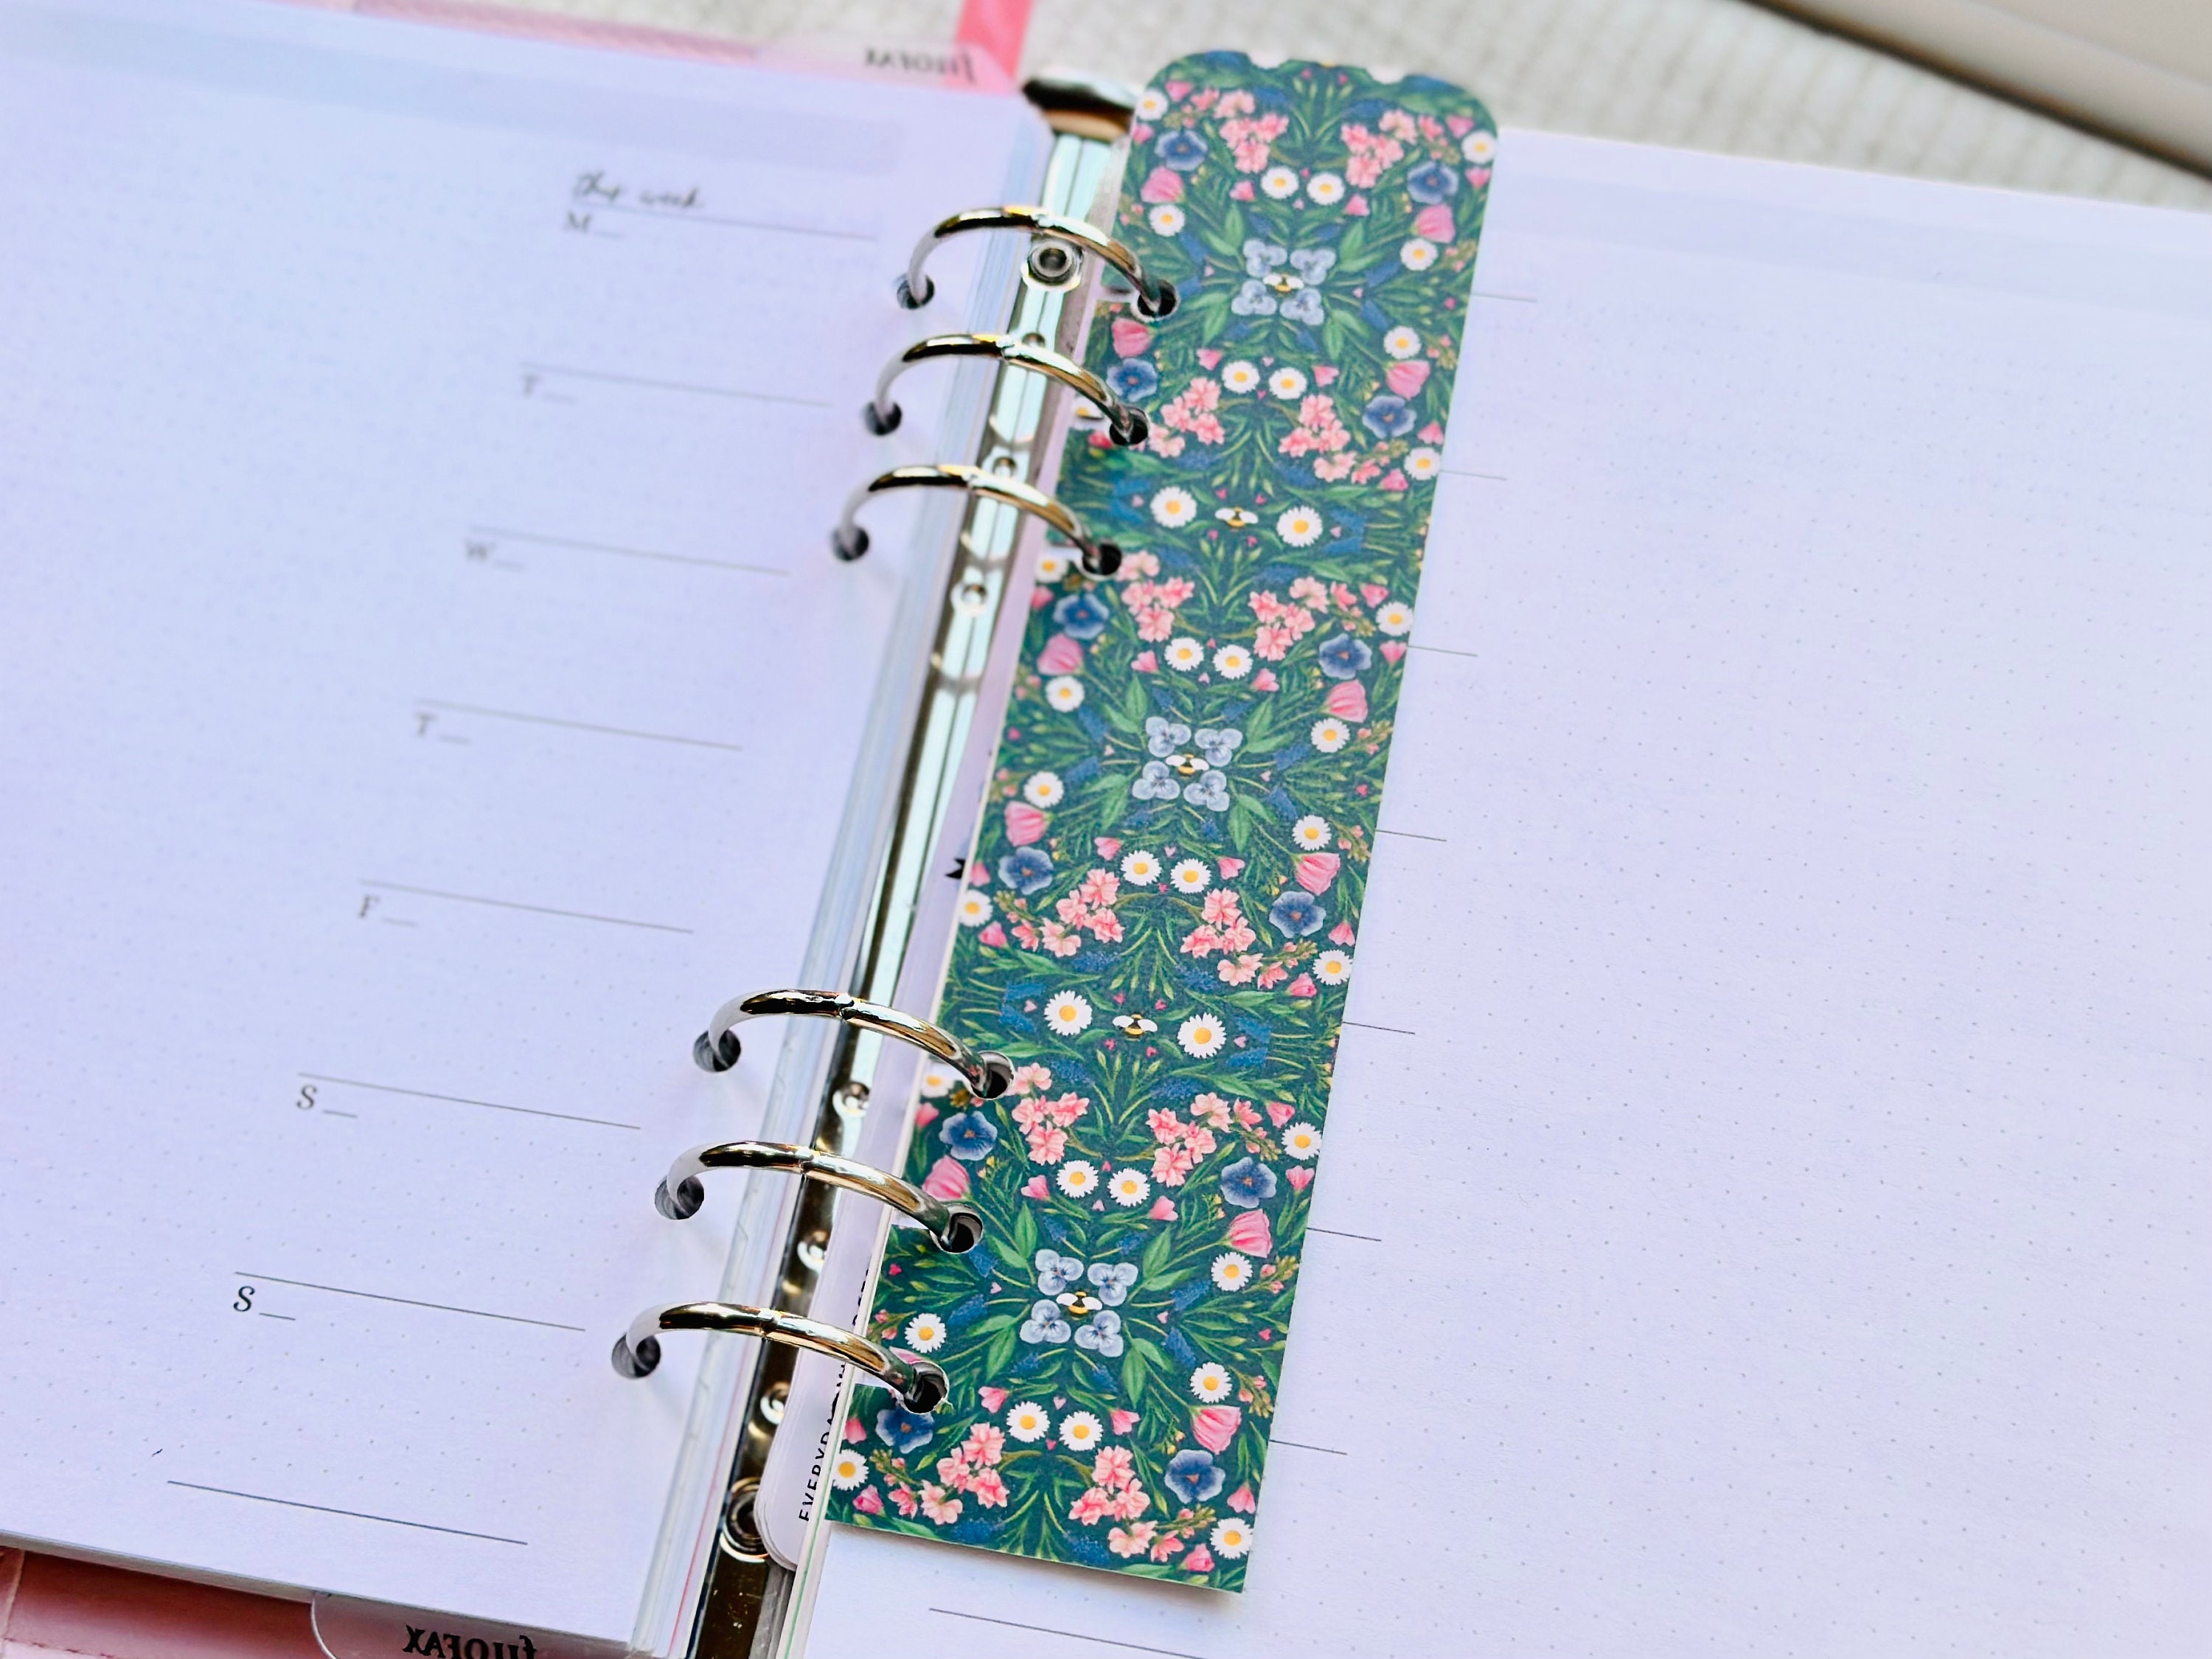  Pocket Food Journal Planner Insert Refill, 3.2 x 4.7 inches,  Pre-Punched for 6-Rings to Fit Filofax, LV PM, Kikki K, Moterm and Other  Binders, 30 Sheets Per Pack : Handmade Products